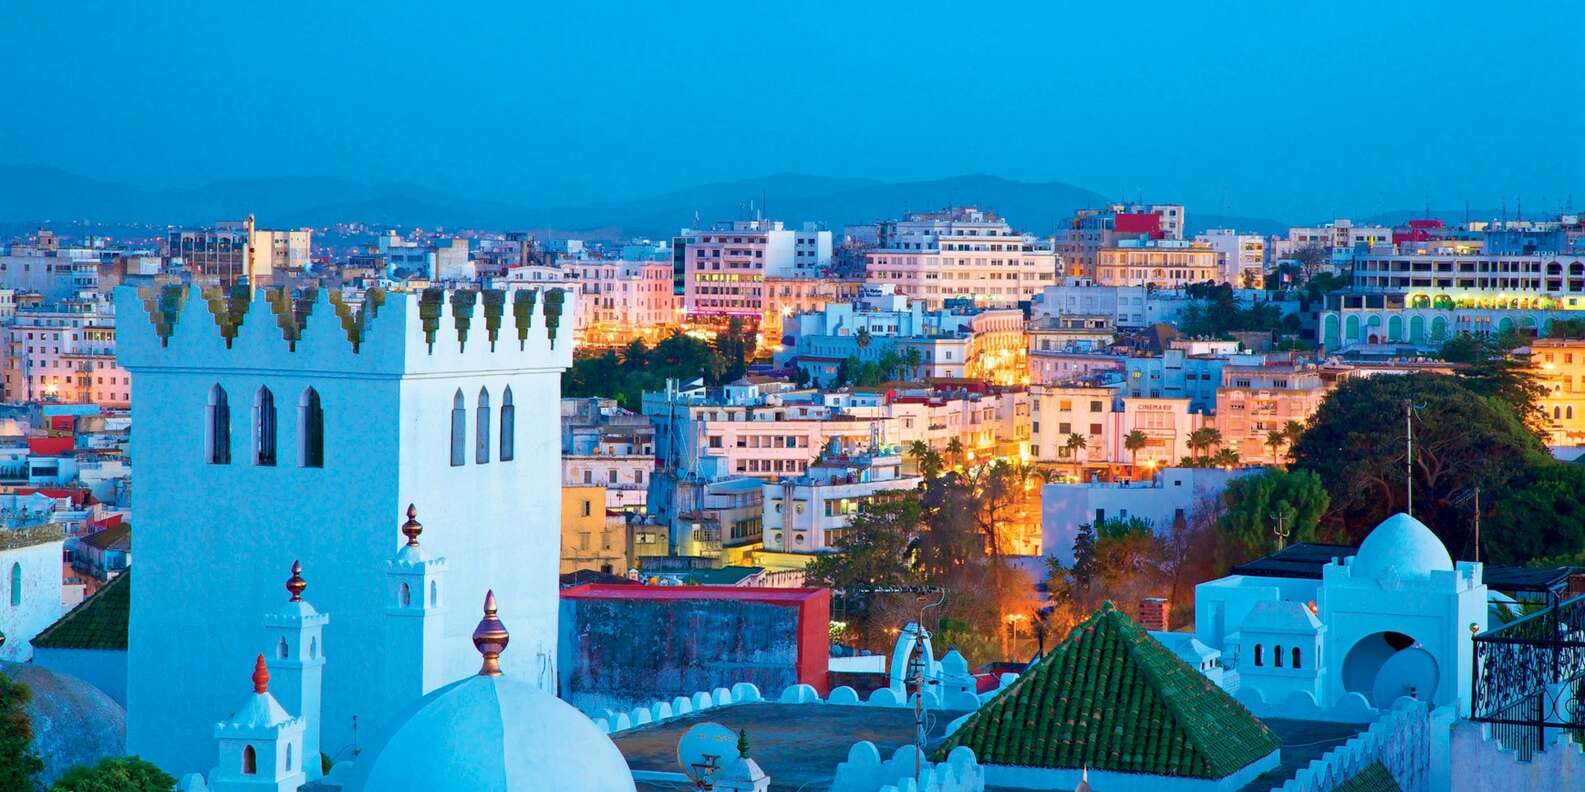 What to do in Tangier